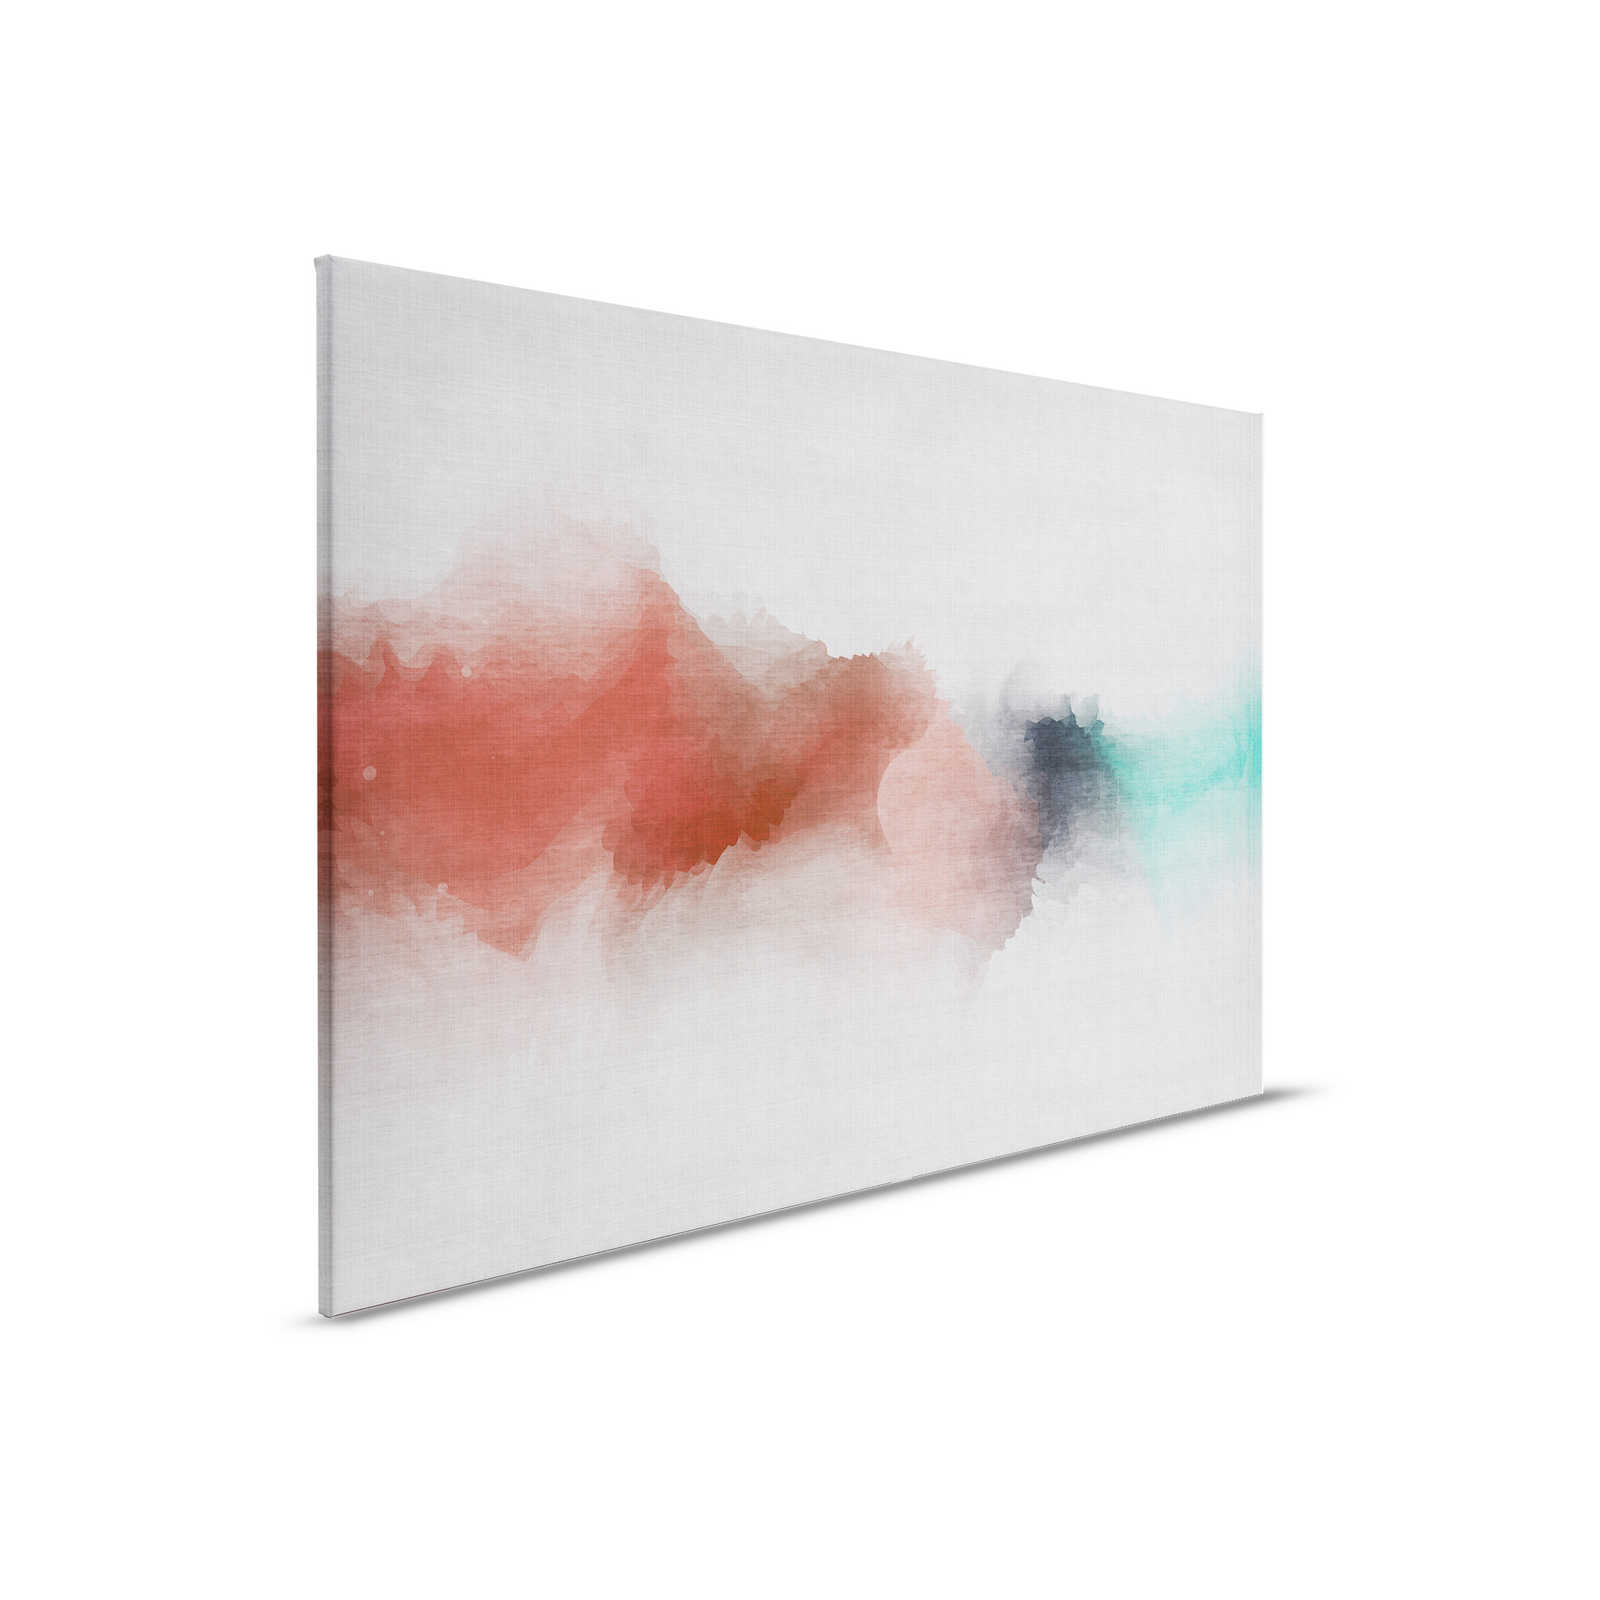         Daydream 2 - Canvas painting in natural linen structure with colour spot in watercolour style - 0.90 m x 0.60 m
    